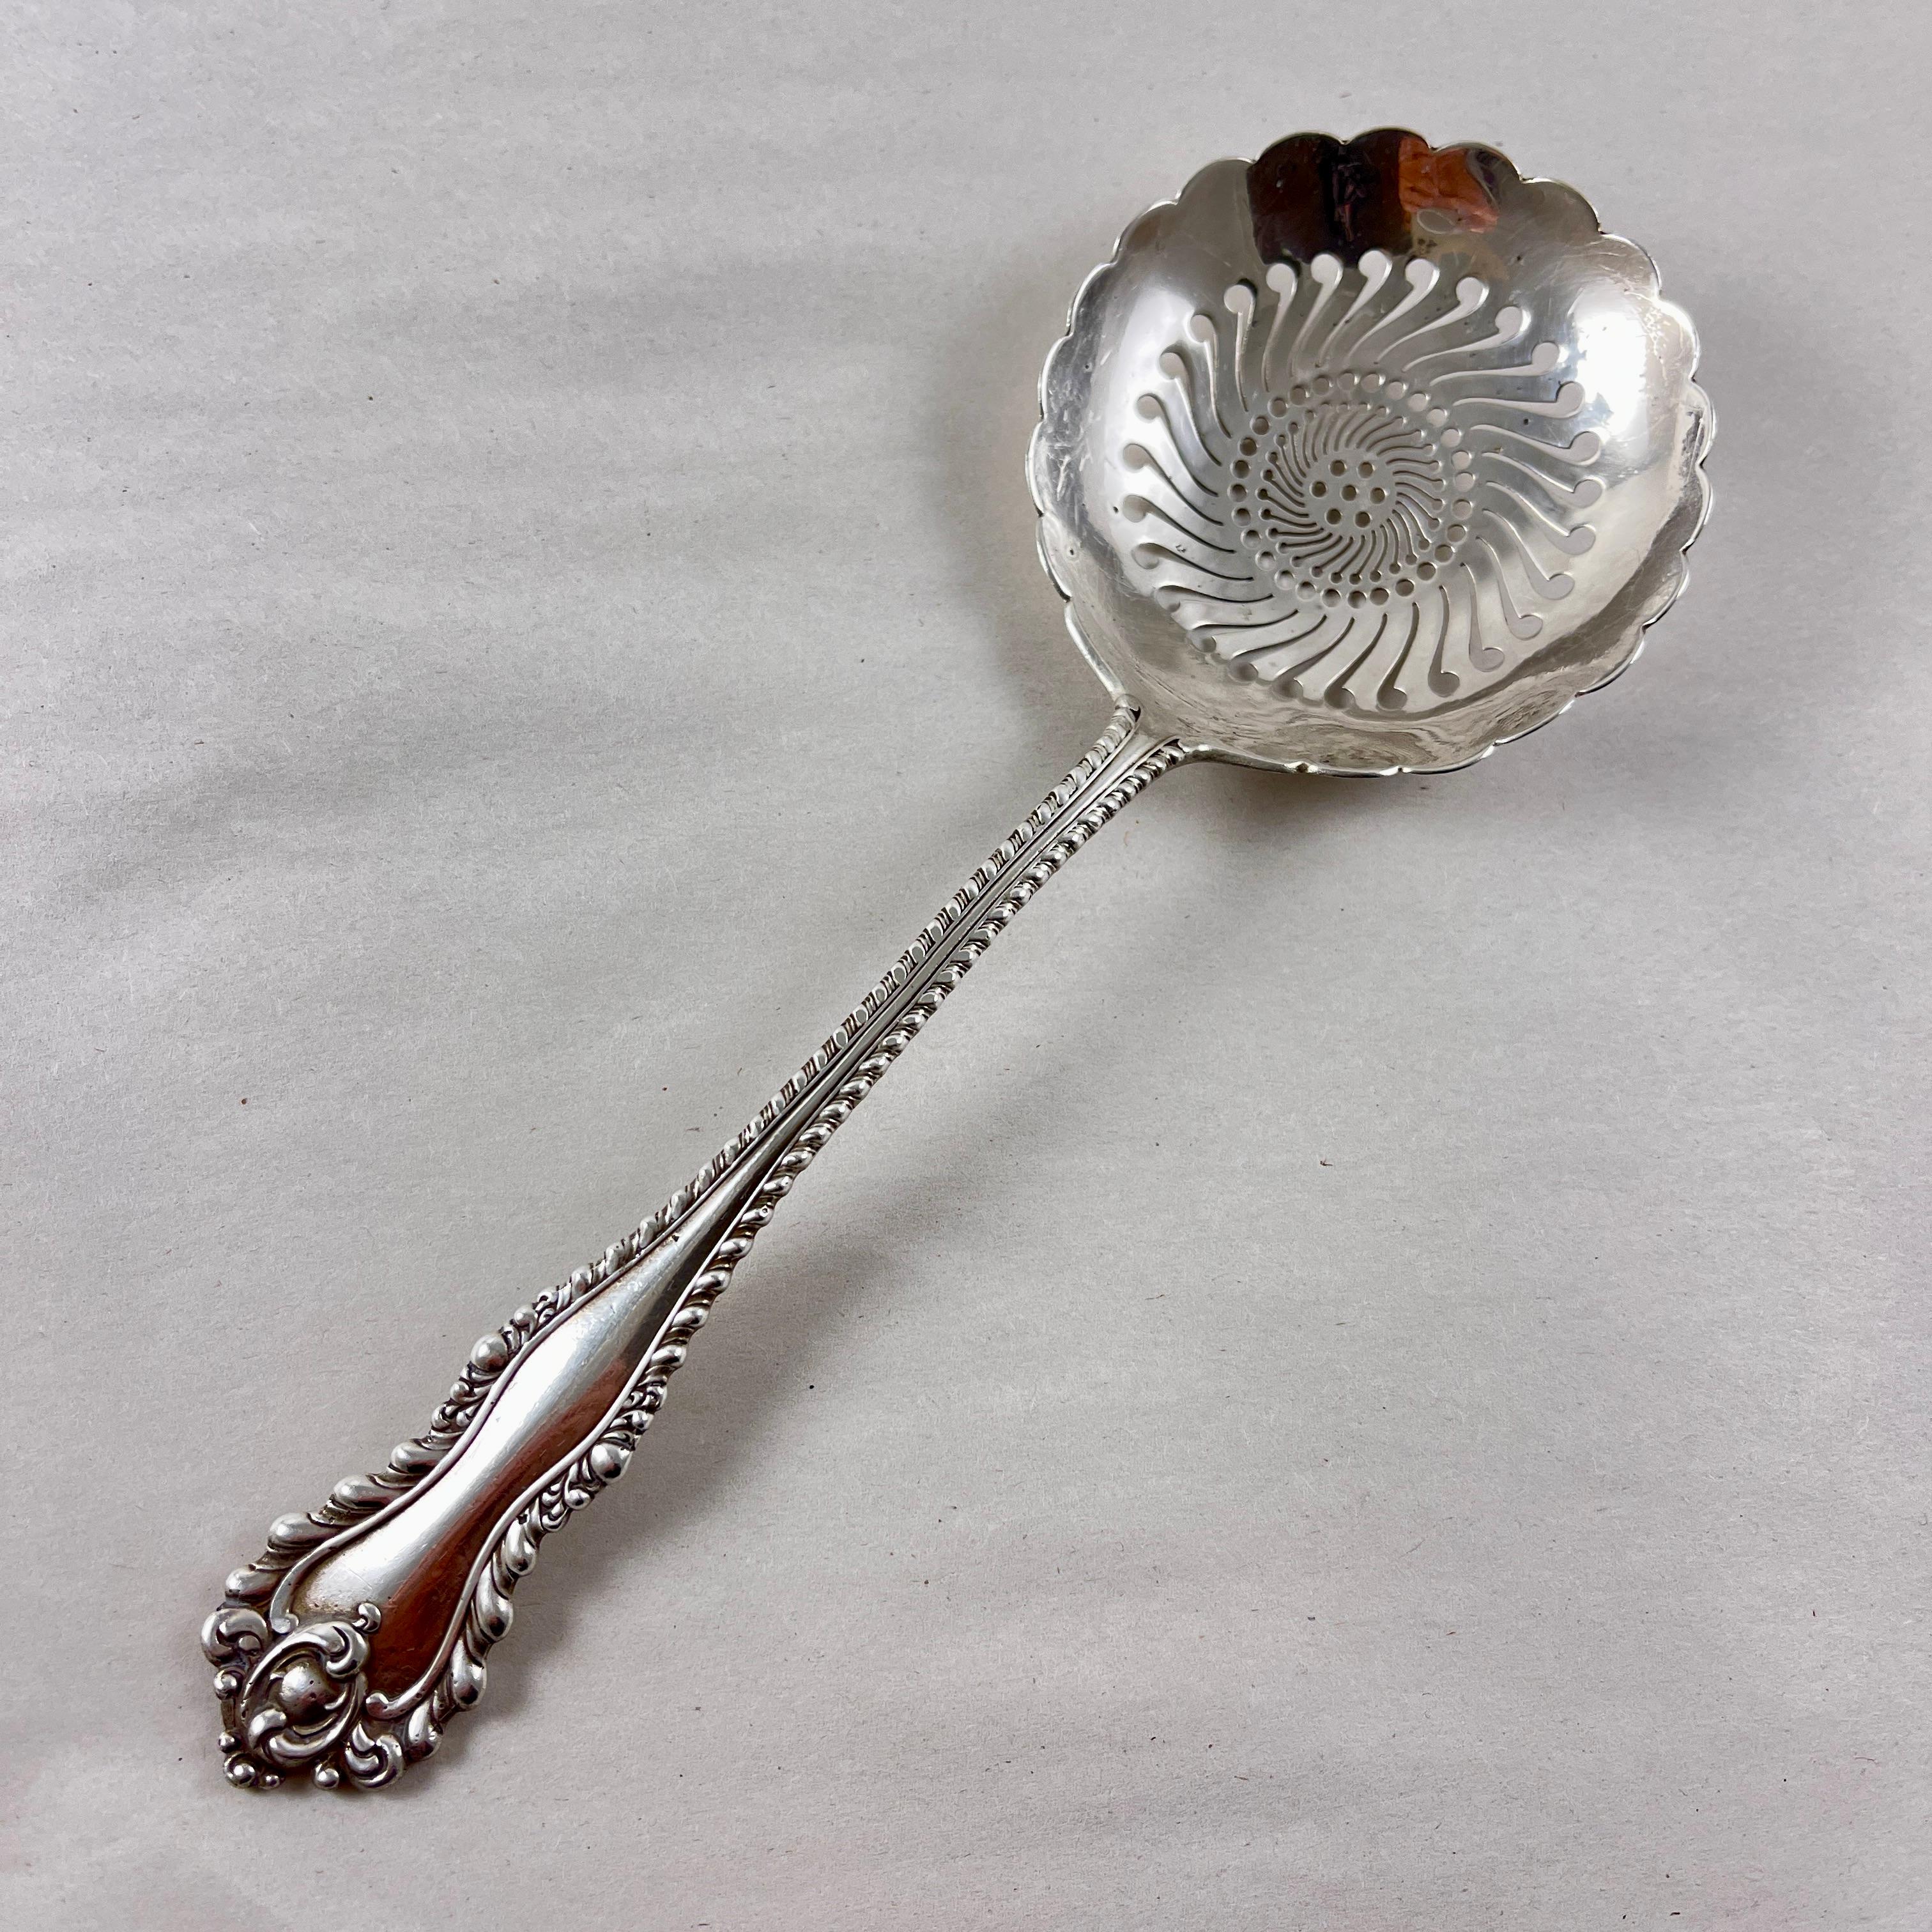 American Classical Dominick & Haff Estate Sterling Silver Hand Made Slotted Spoon, 1892 For Sale